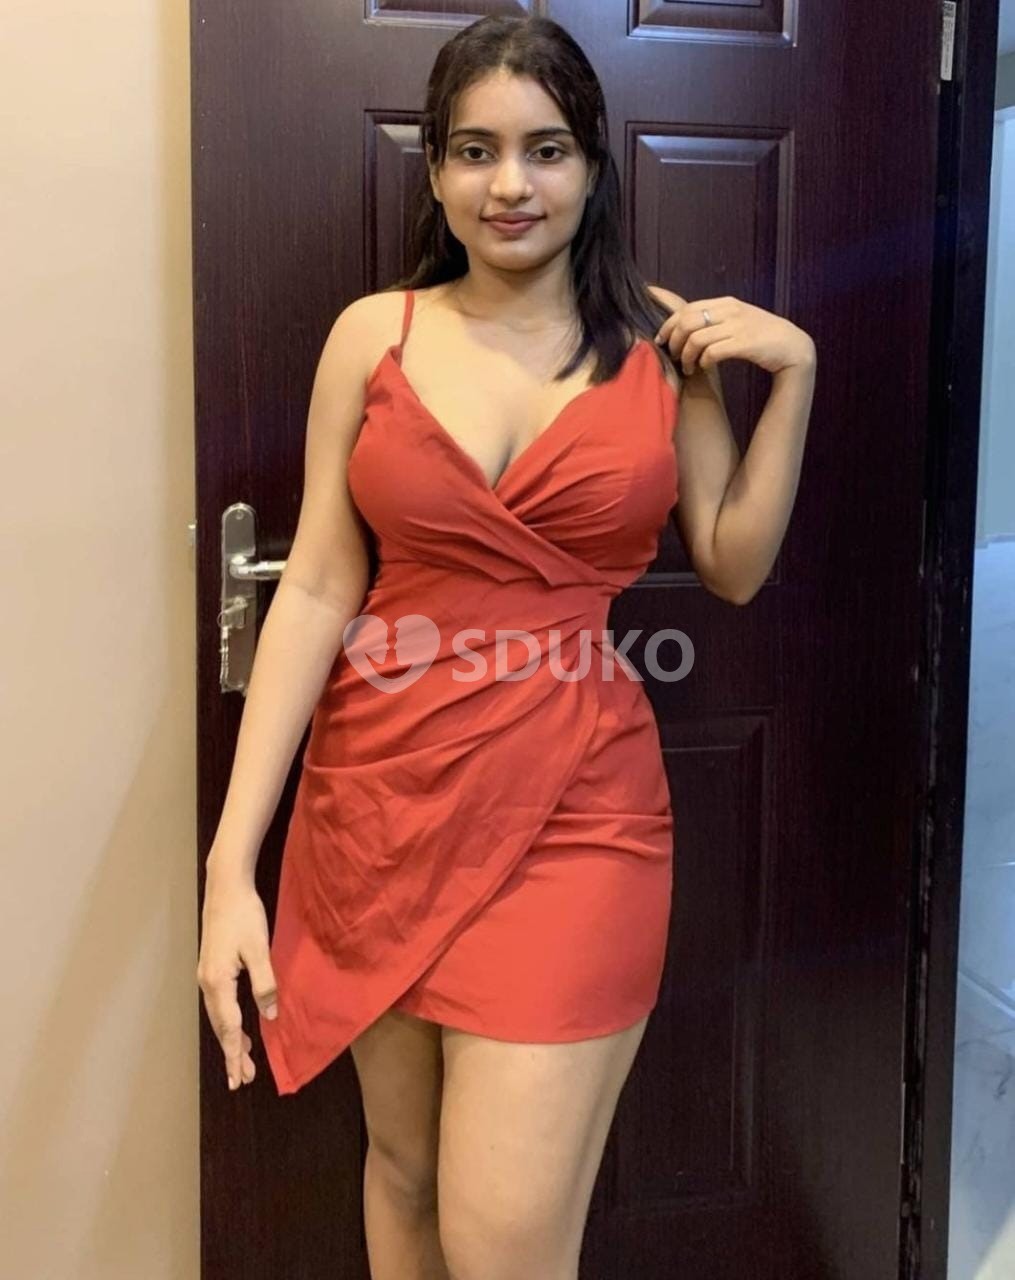 City bhiwandi best call girl service available 24 hours full safe and secure